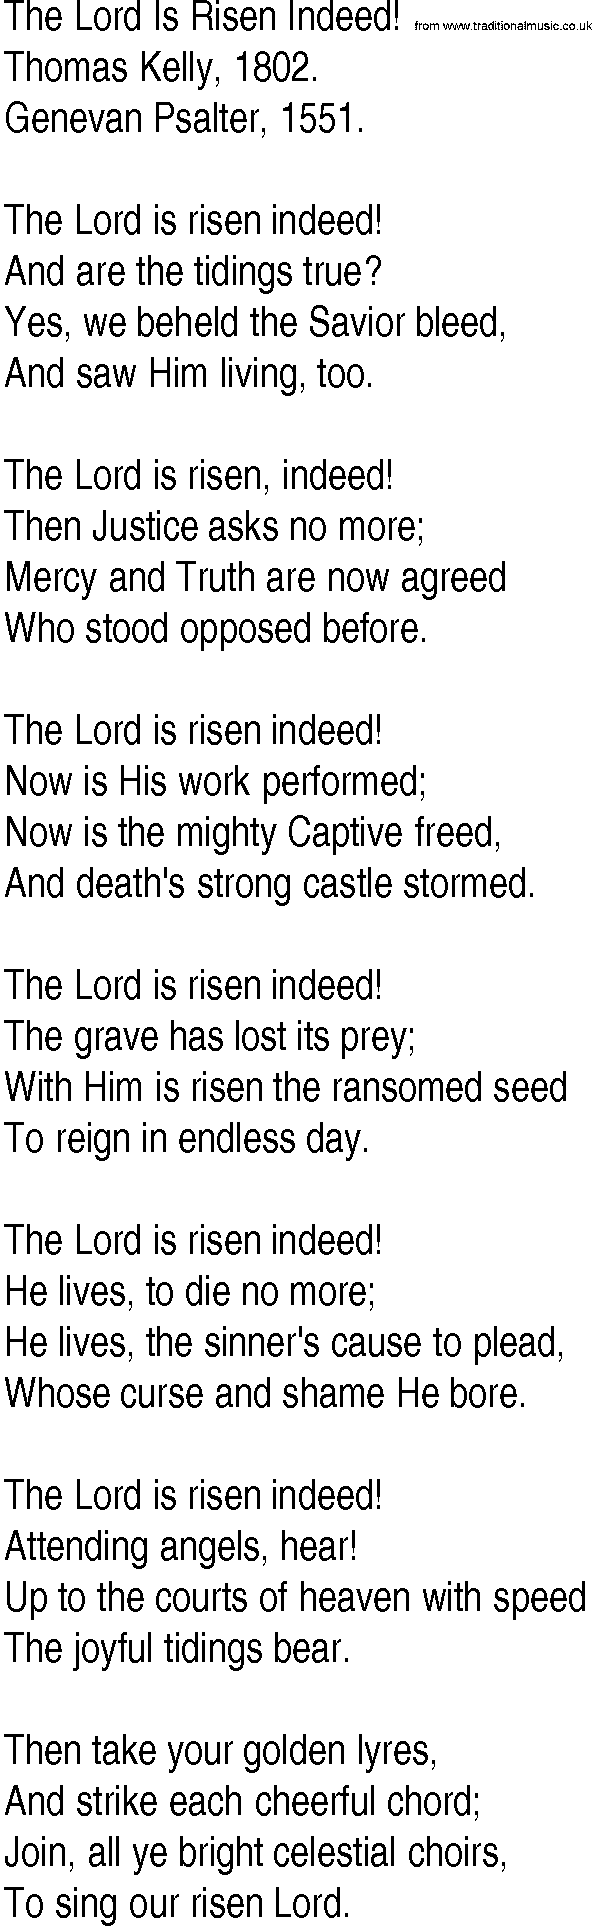 Hymn and Gospel Song: The Lord Is Risen Indeed! by Thomas Kelly lyrics